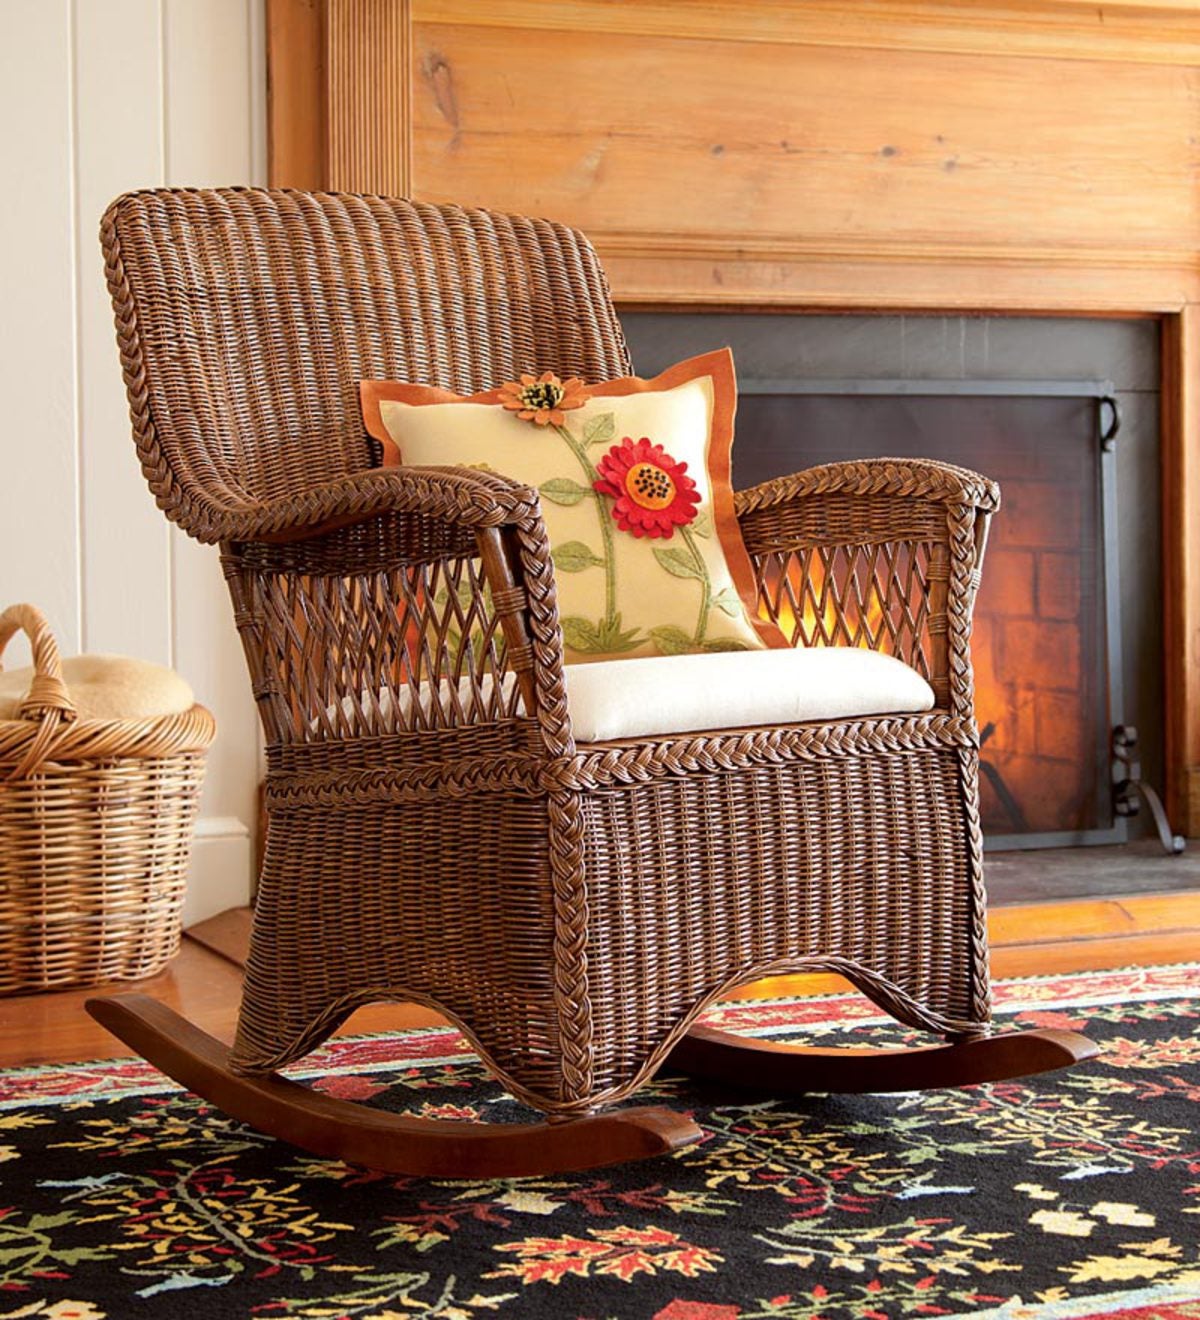 Classic Wicker Rocking Chair With Seat Cushion | PlowHearth